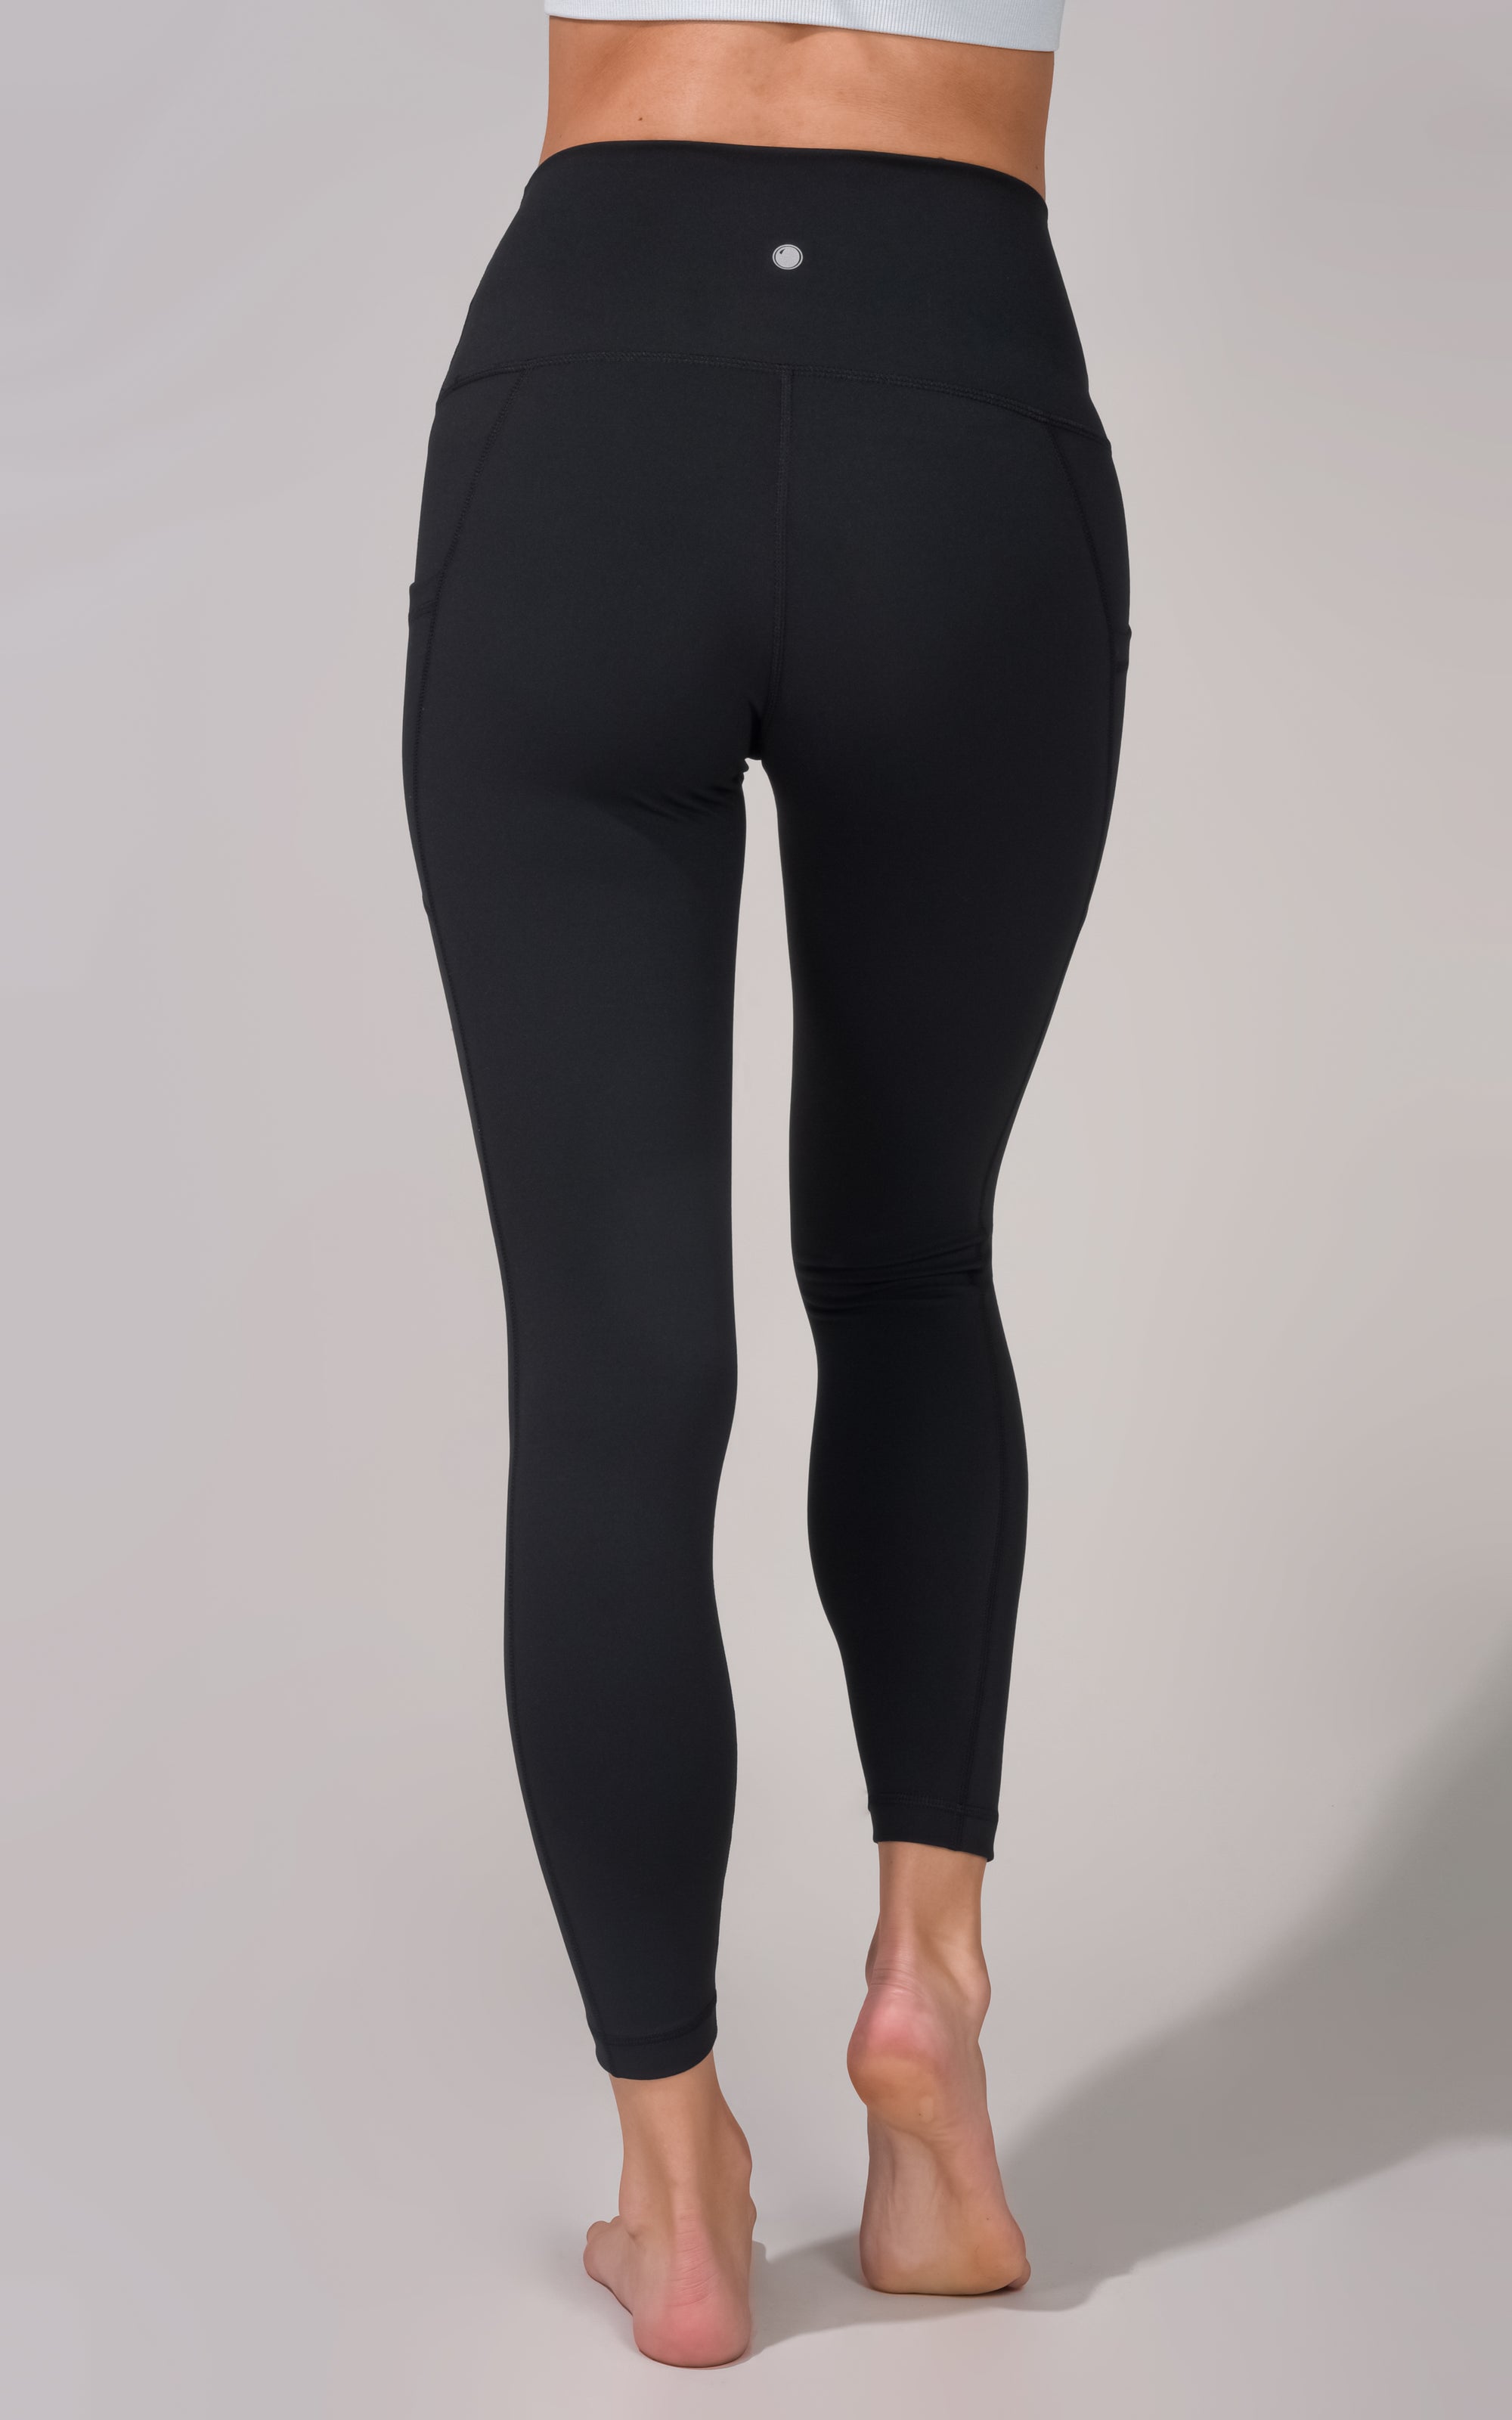 Yogalicious Lux Ankle Legging Yoga pants Athletic Activewear Gym Workout  Sportswear Black - $36 New With Tags - From Viv